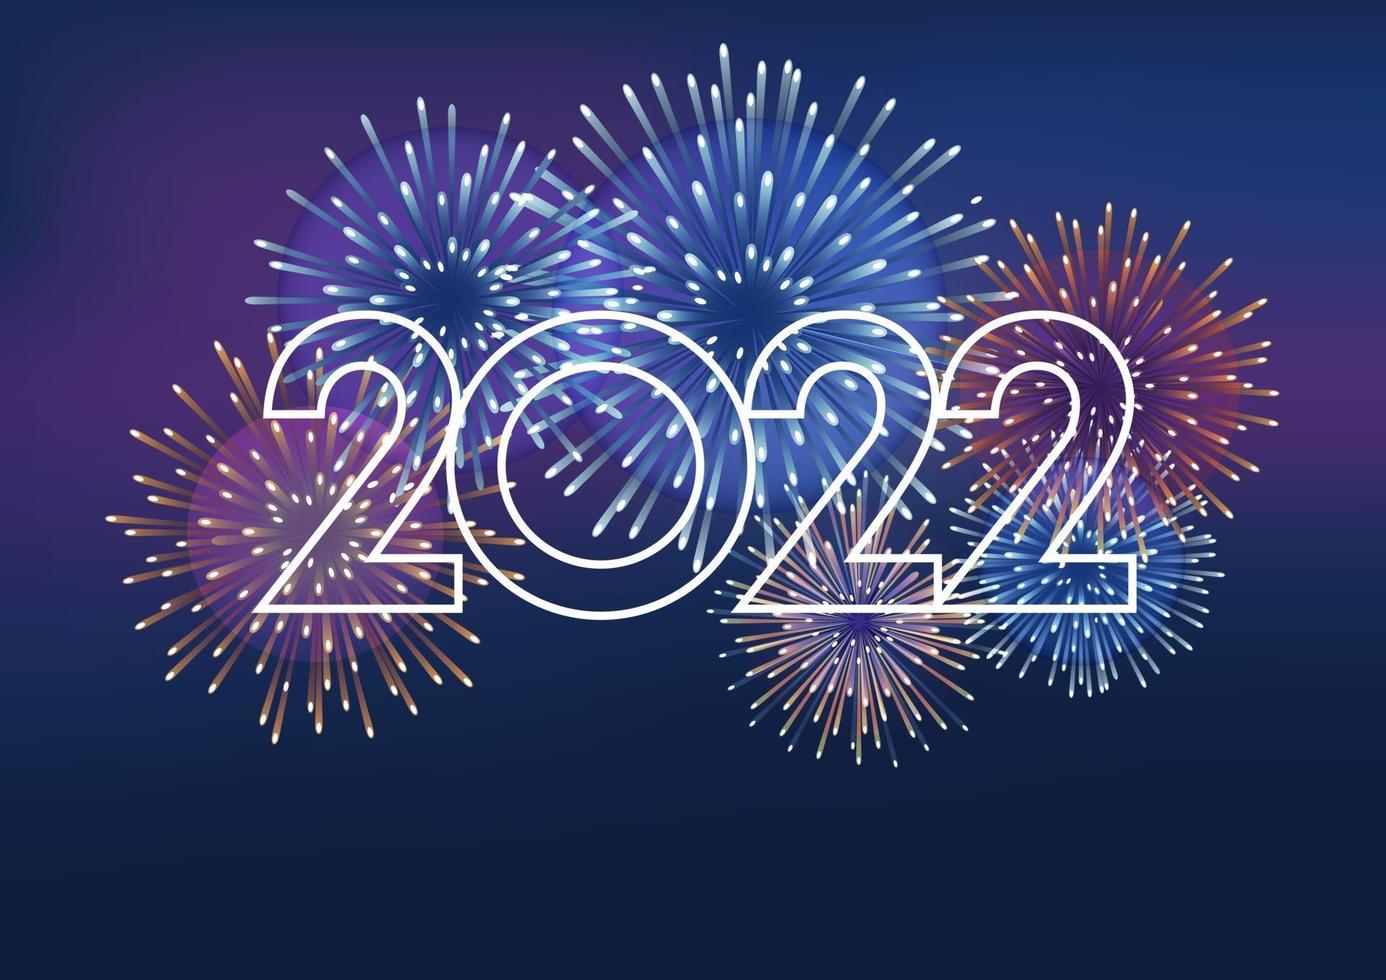 The Year 2022 Logo And Fireworks With Text Space On A Dark Background. Vector illustration Celebrating The New Year.